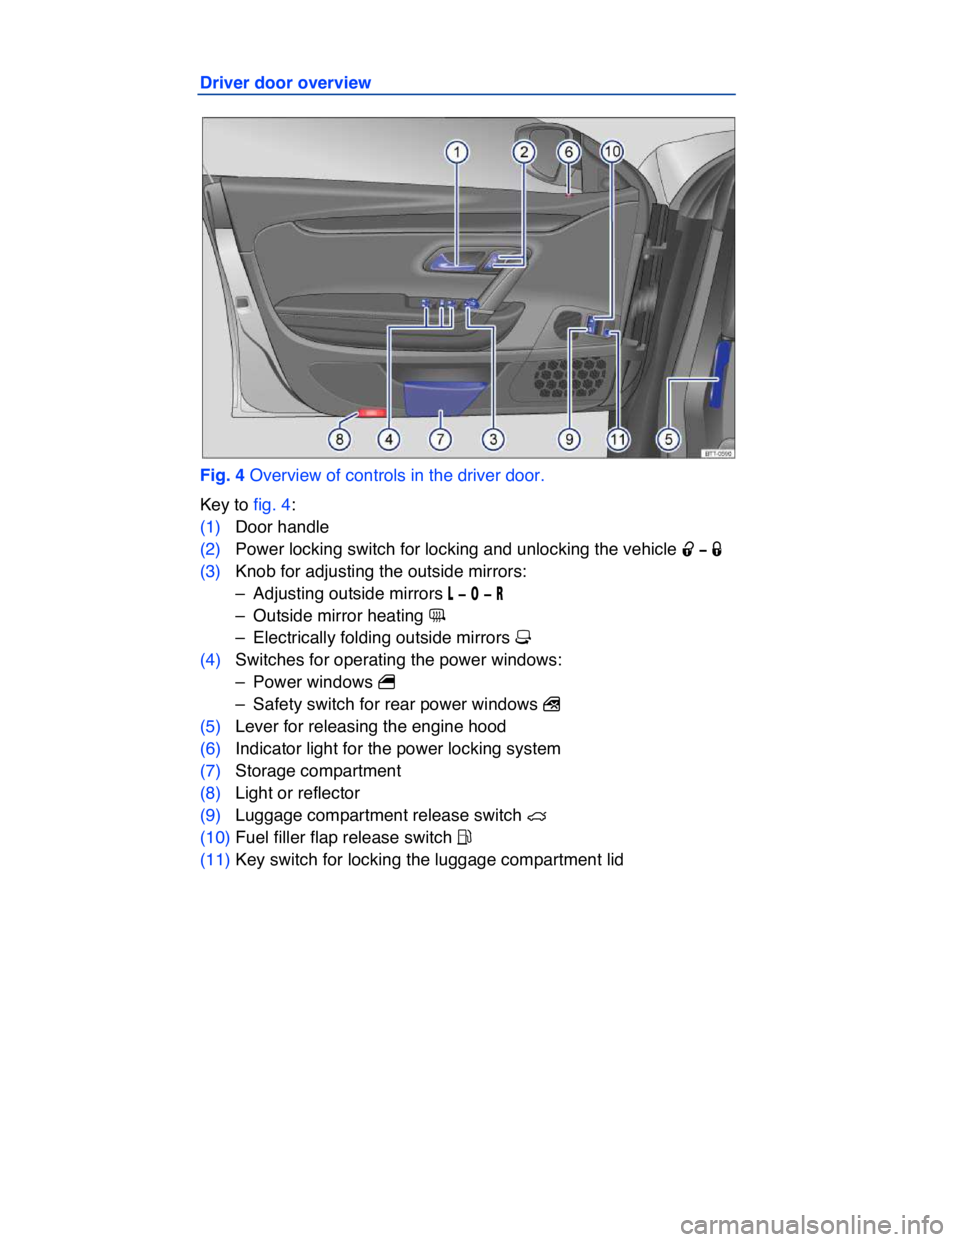 VOLKSWAGEN CC 2010  Owners Manual  
Driver door overview 
 
Fig. 4 Overview of controls in the driver door. 
Key to fig. 4: 
(1) Door handle  
(2) Power locking switch for locking and unlocking the vehicle �0 �